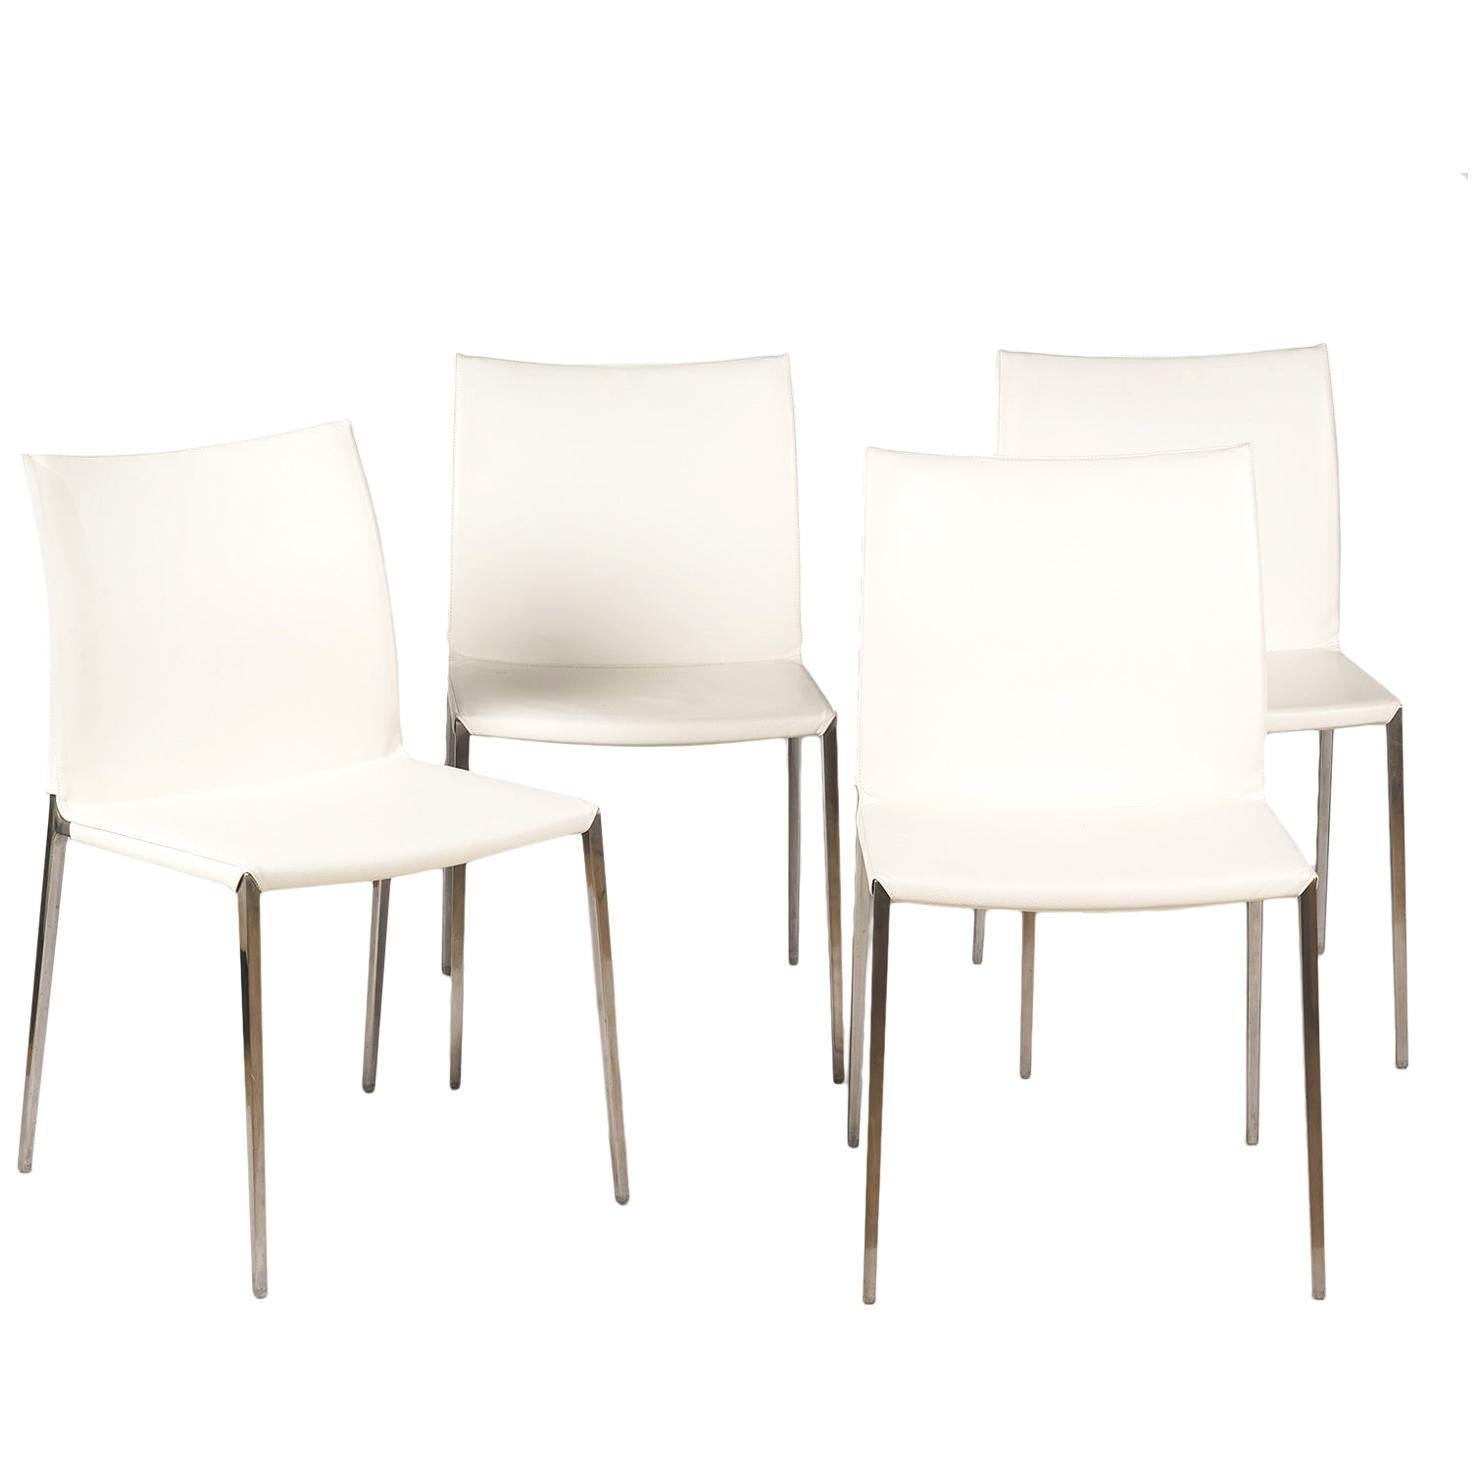 Four Italian 'Lia' Leather Side Chairs by Roberto Barbieri for Zanotta, Italy